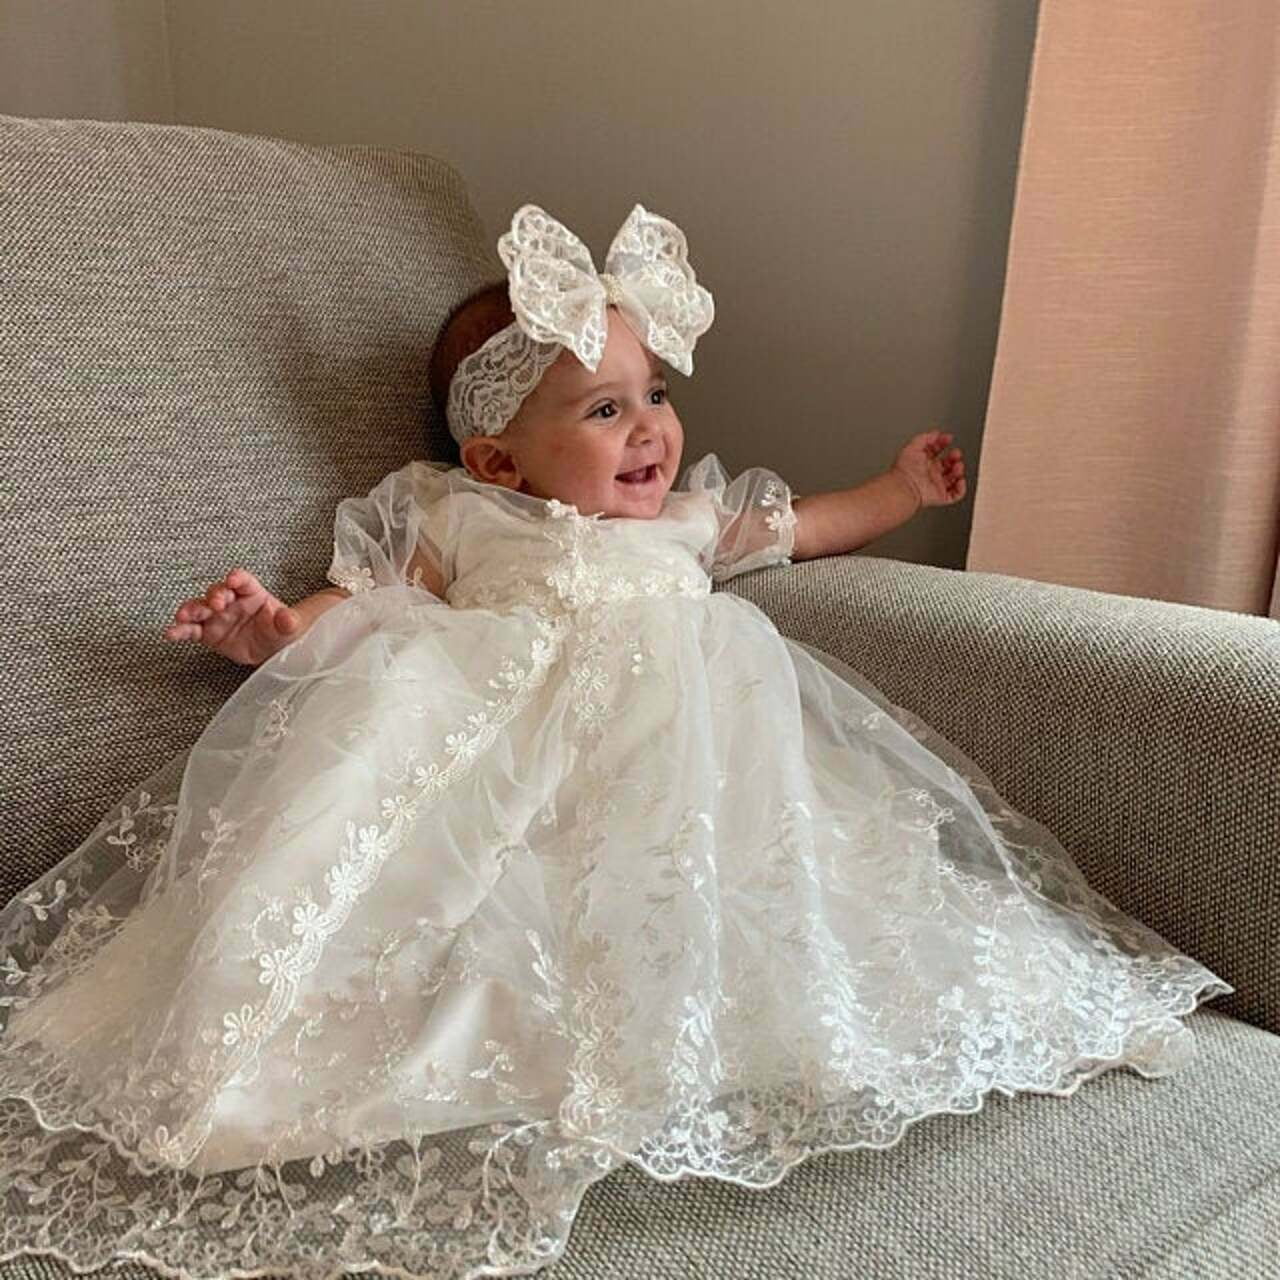 Baby Flower Girls White Embroidered Organza Dress Gown Christening Baptism New 